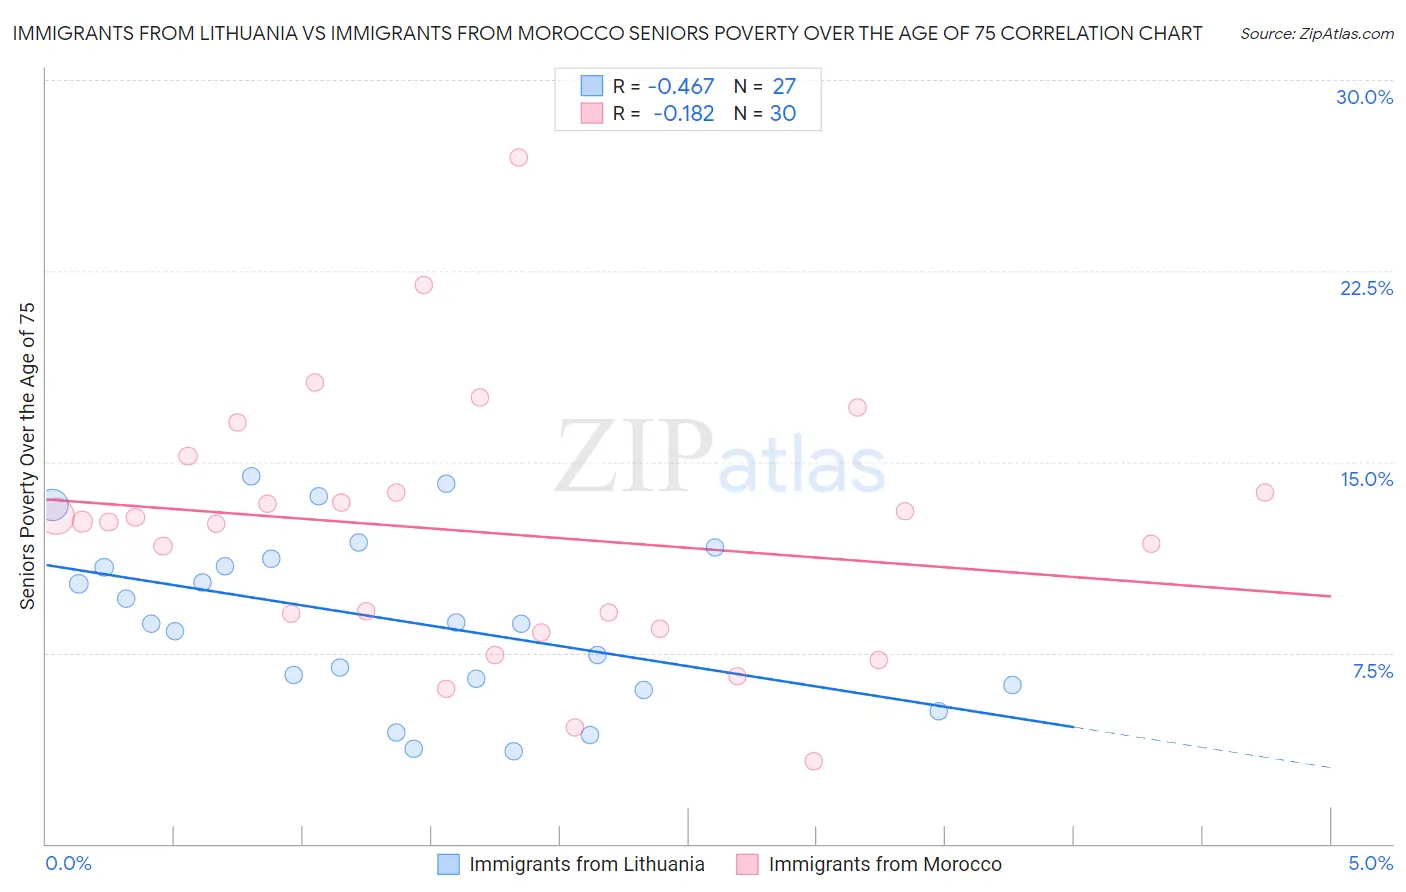 Immigrants from Lithuania vs Immigrants from Morocco Seniors Poverty Over the Age of 75